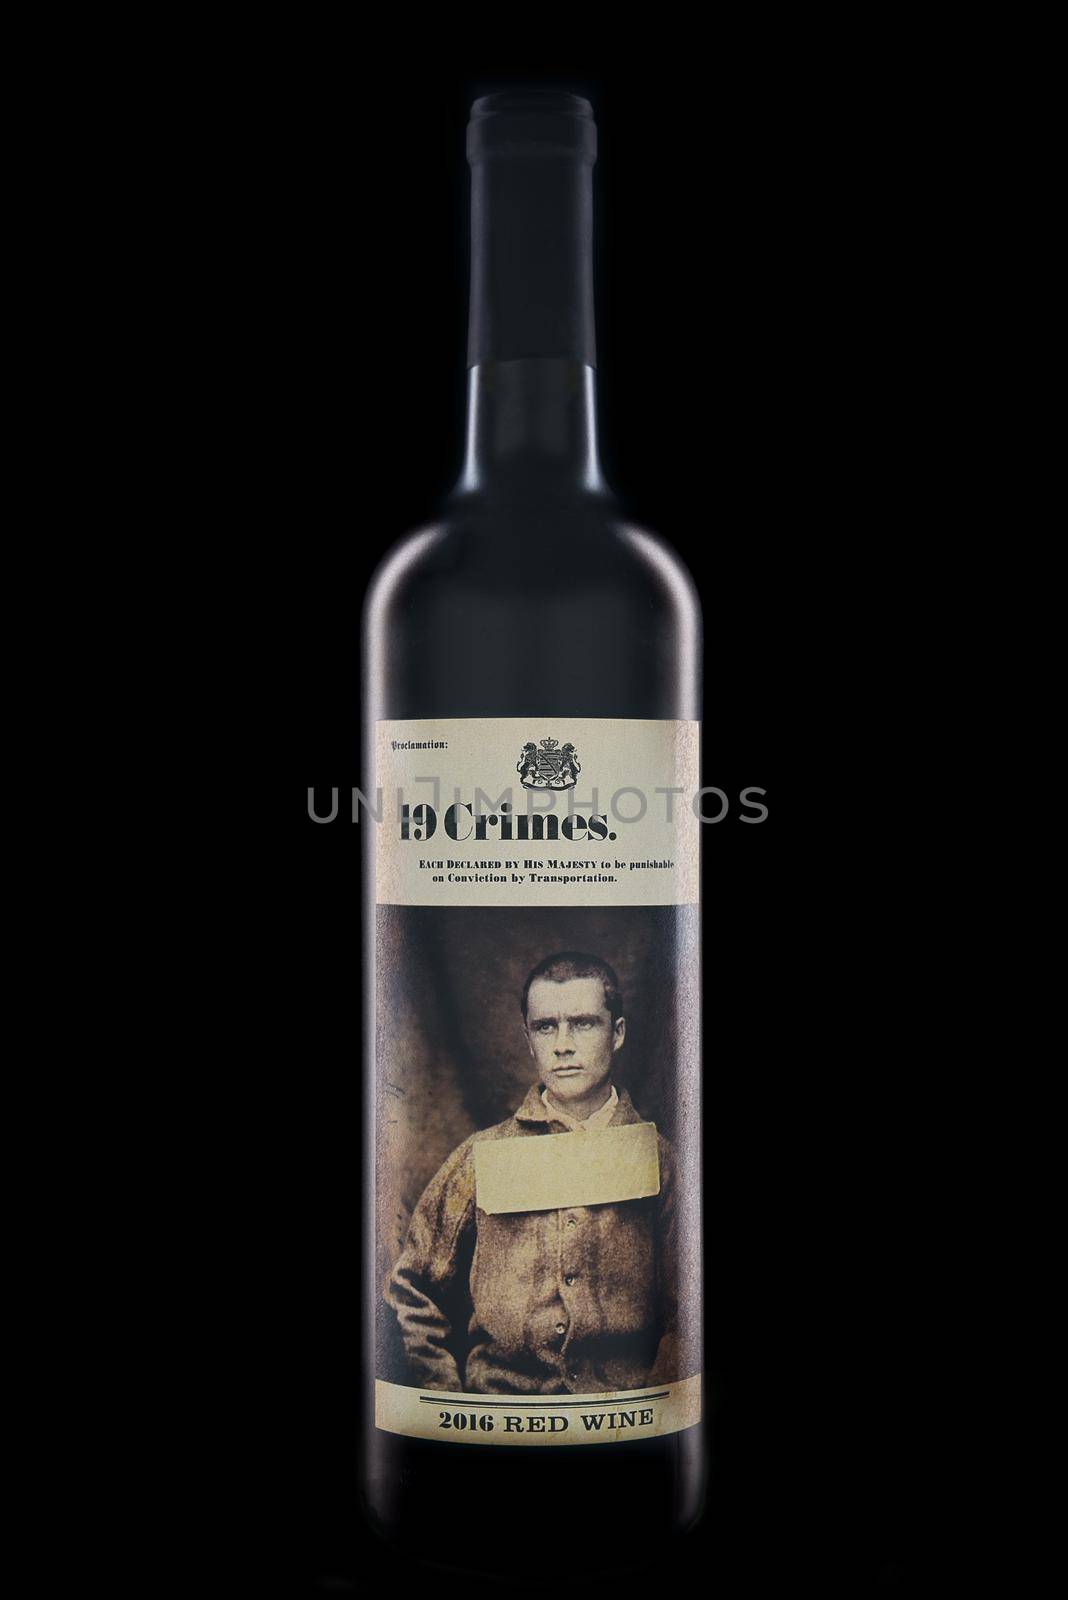 A Bottle of 19 Crimes Red Wine by sCukrov